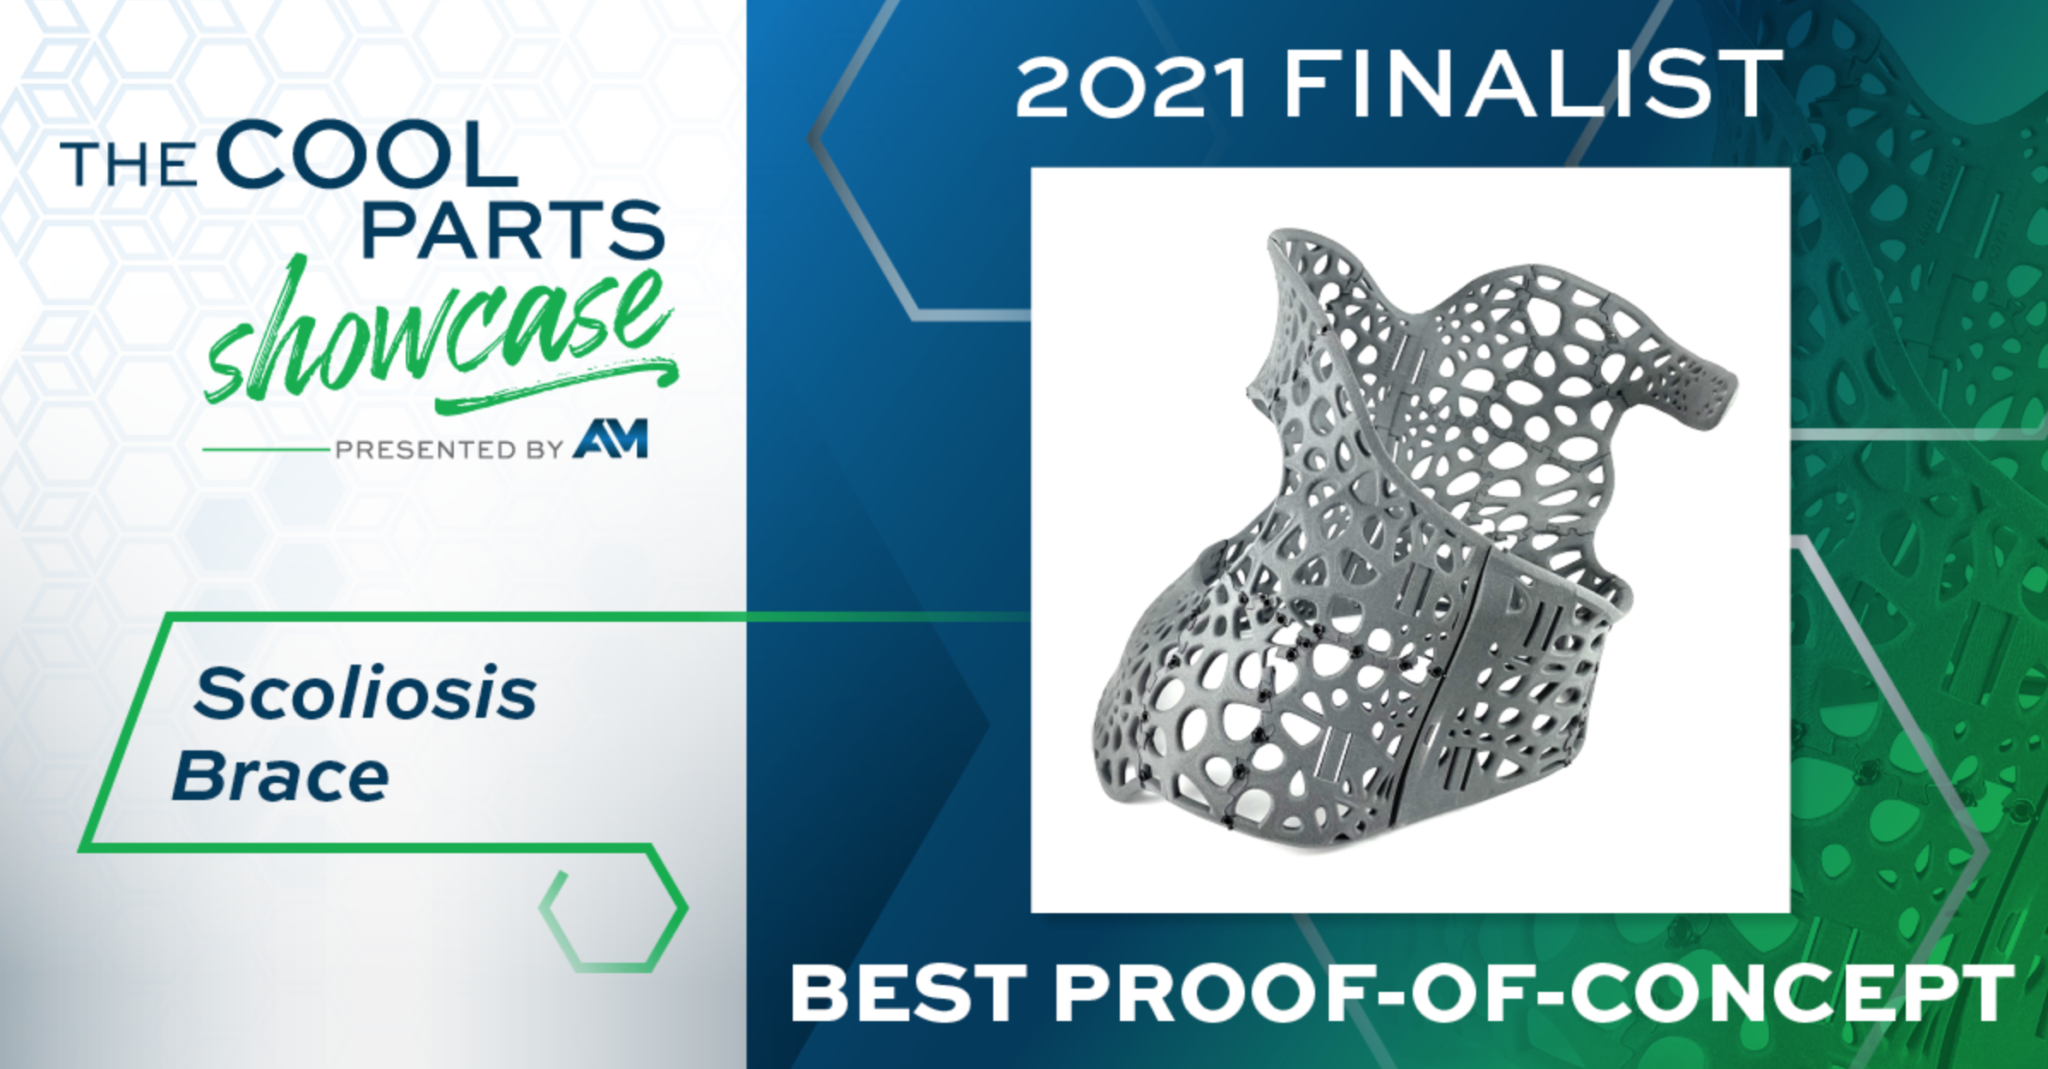 Extol Awarded as Finalist for Cool Parts Showcase by Additive Manufacturing Magazine